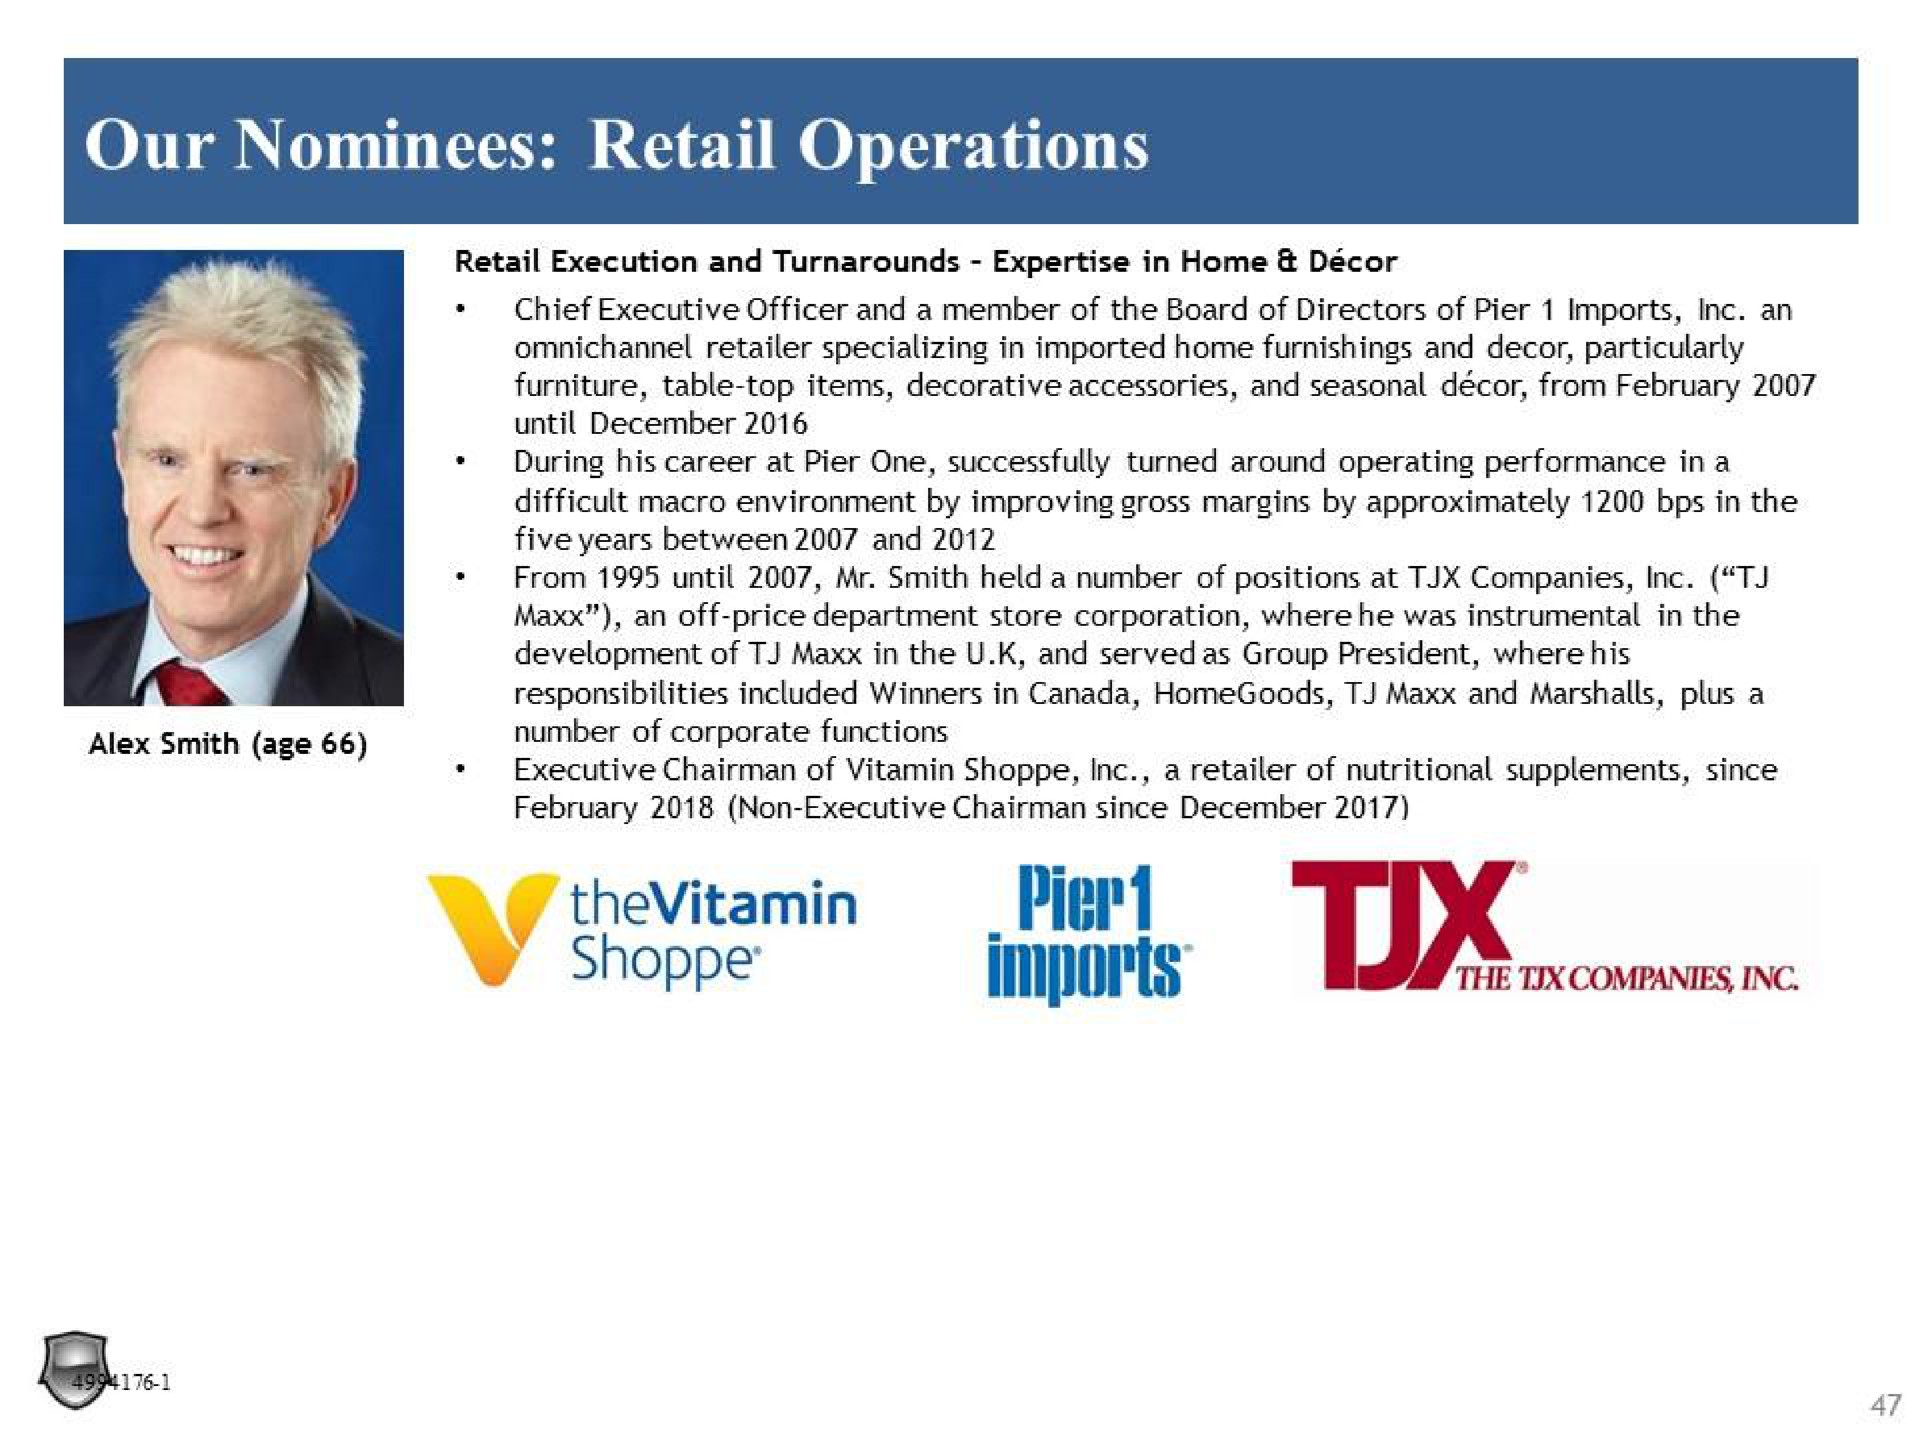 our nominees retail operations shoppe pier imports the tux companies | Legion Partners